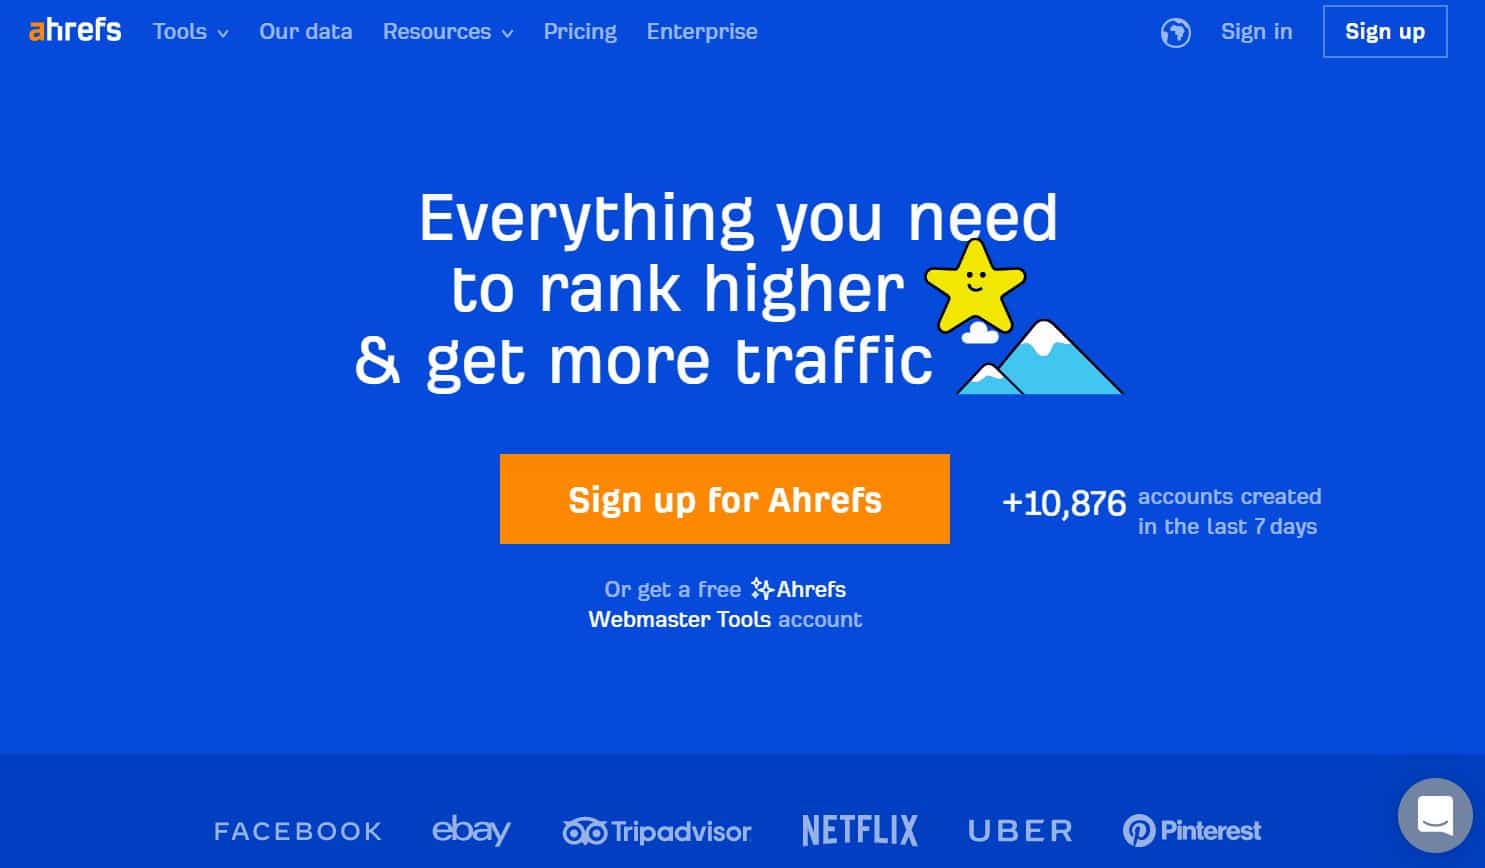 The Ahrefs homepage with the tagline "Everything you need to rank higher & get more traffic".